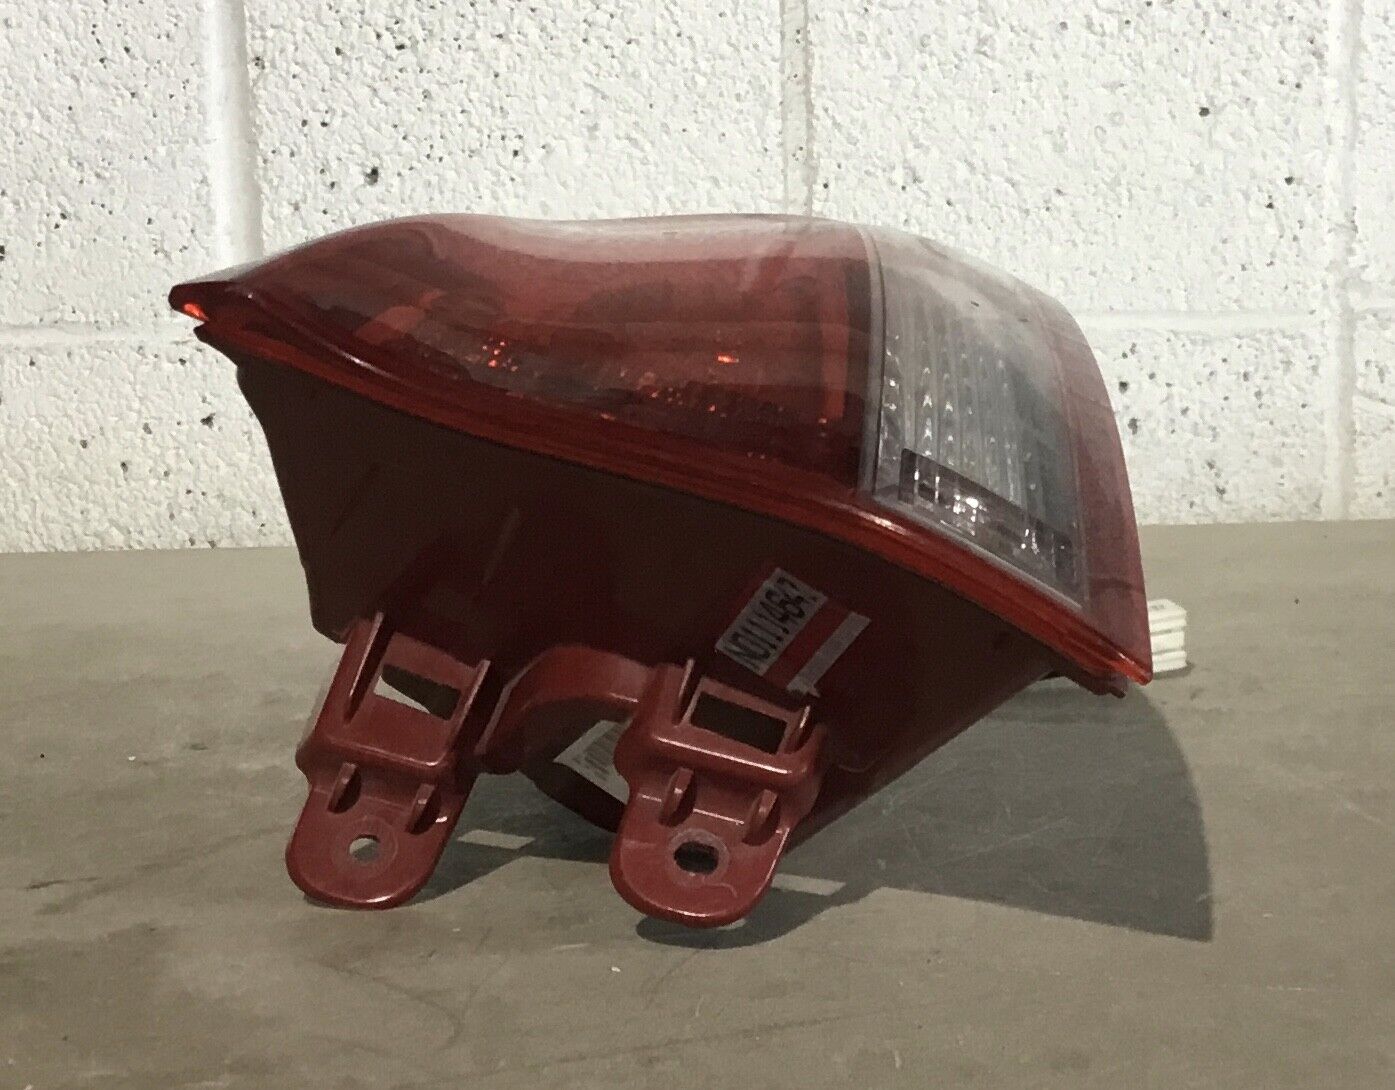 2017-2020 Hyundai Ioniq Right Outer Tail Light Halogen GREAT OEM 92402-G2000 ✅✅